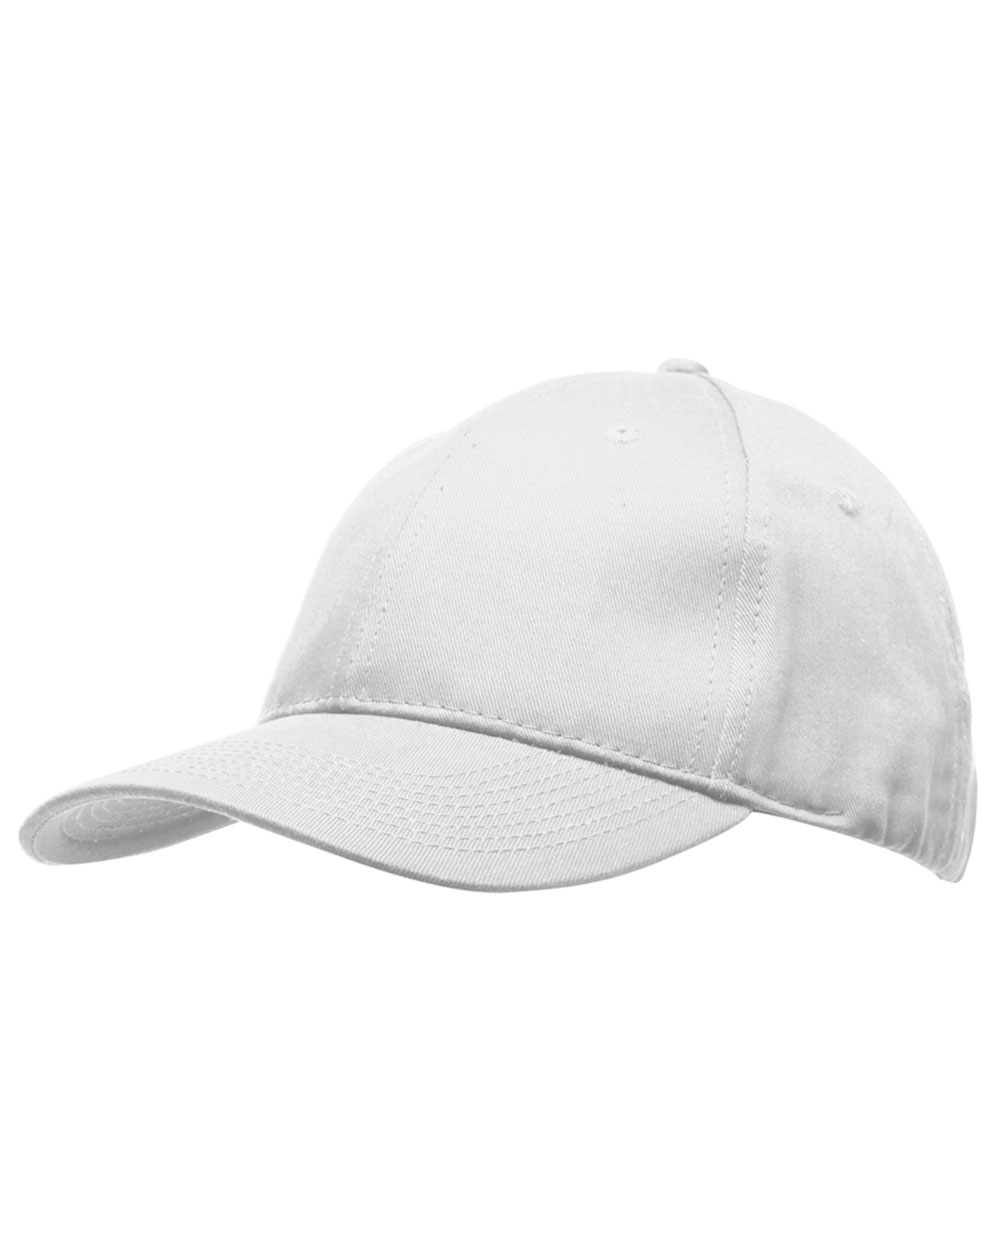 Bayside BS500 Bayside 3660 Structured Twill Cap